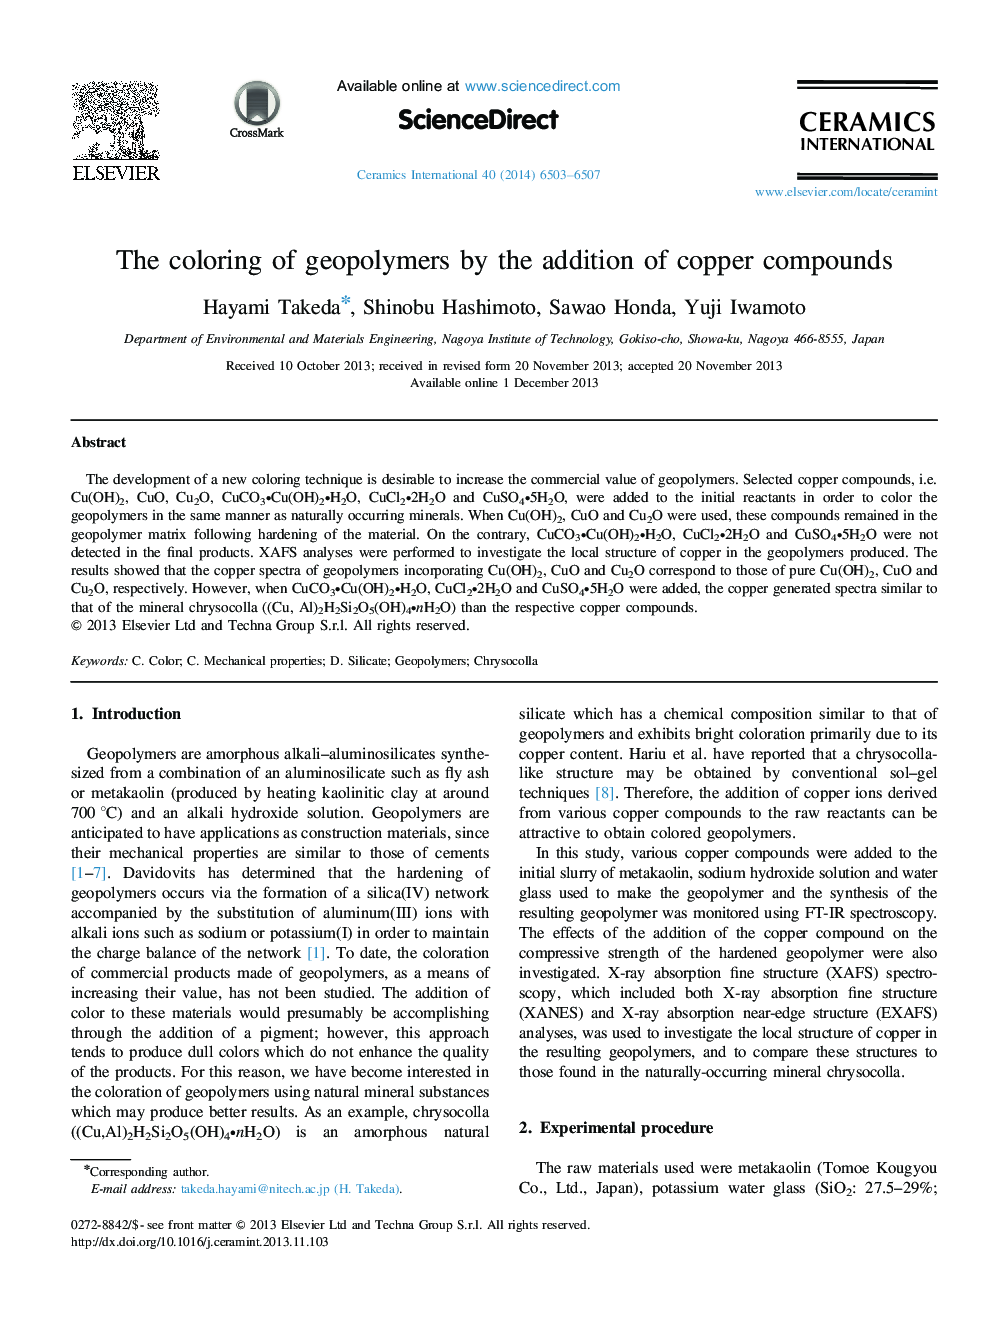 The coloring of geopolymers by the addition of copper compounds